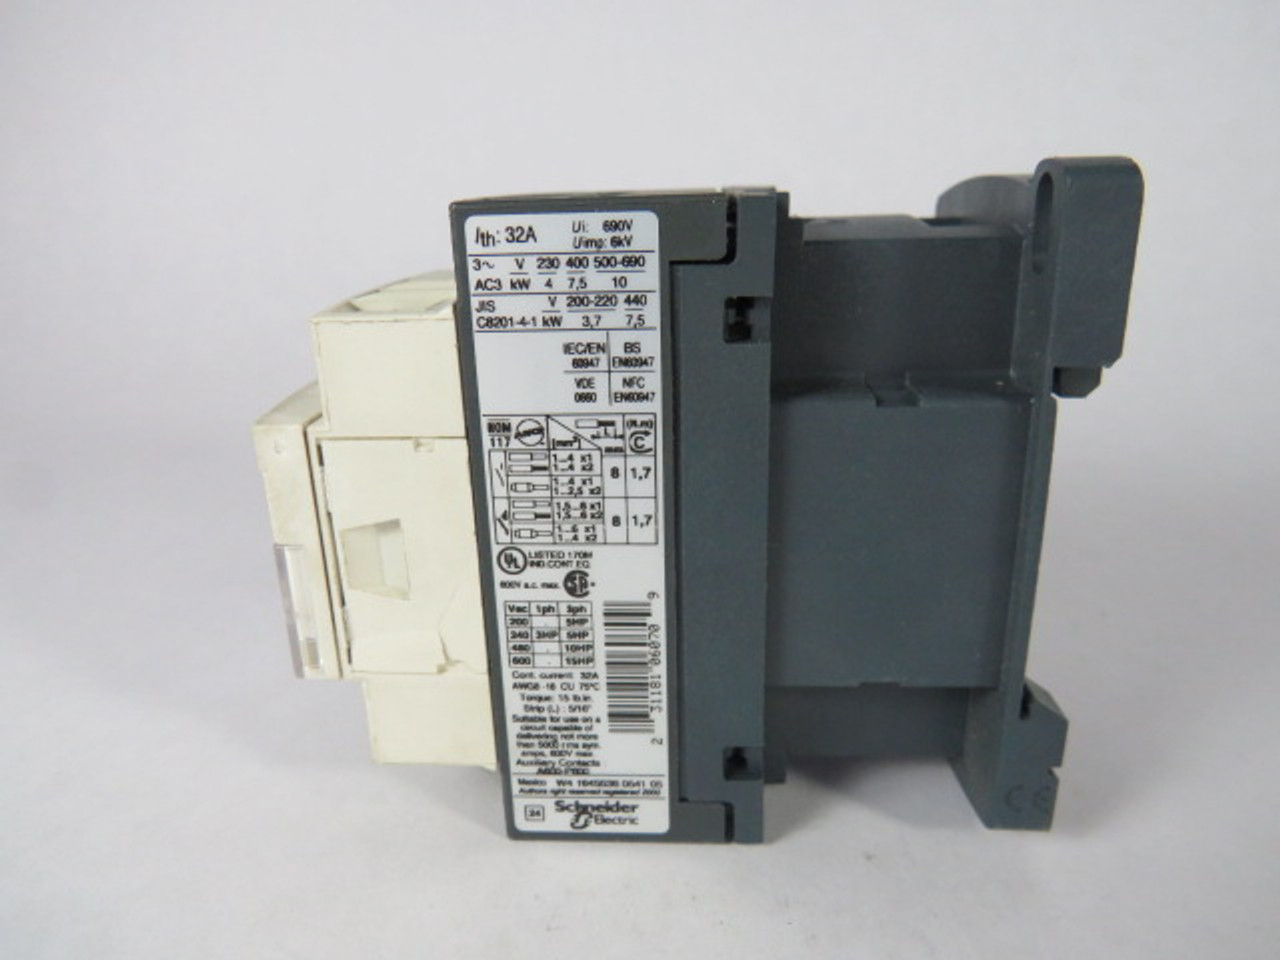 Telemecanique LC1D18F7 Contactor 110V 50/60HZ USED